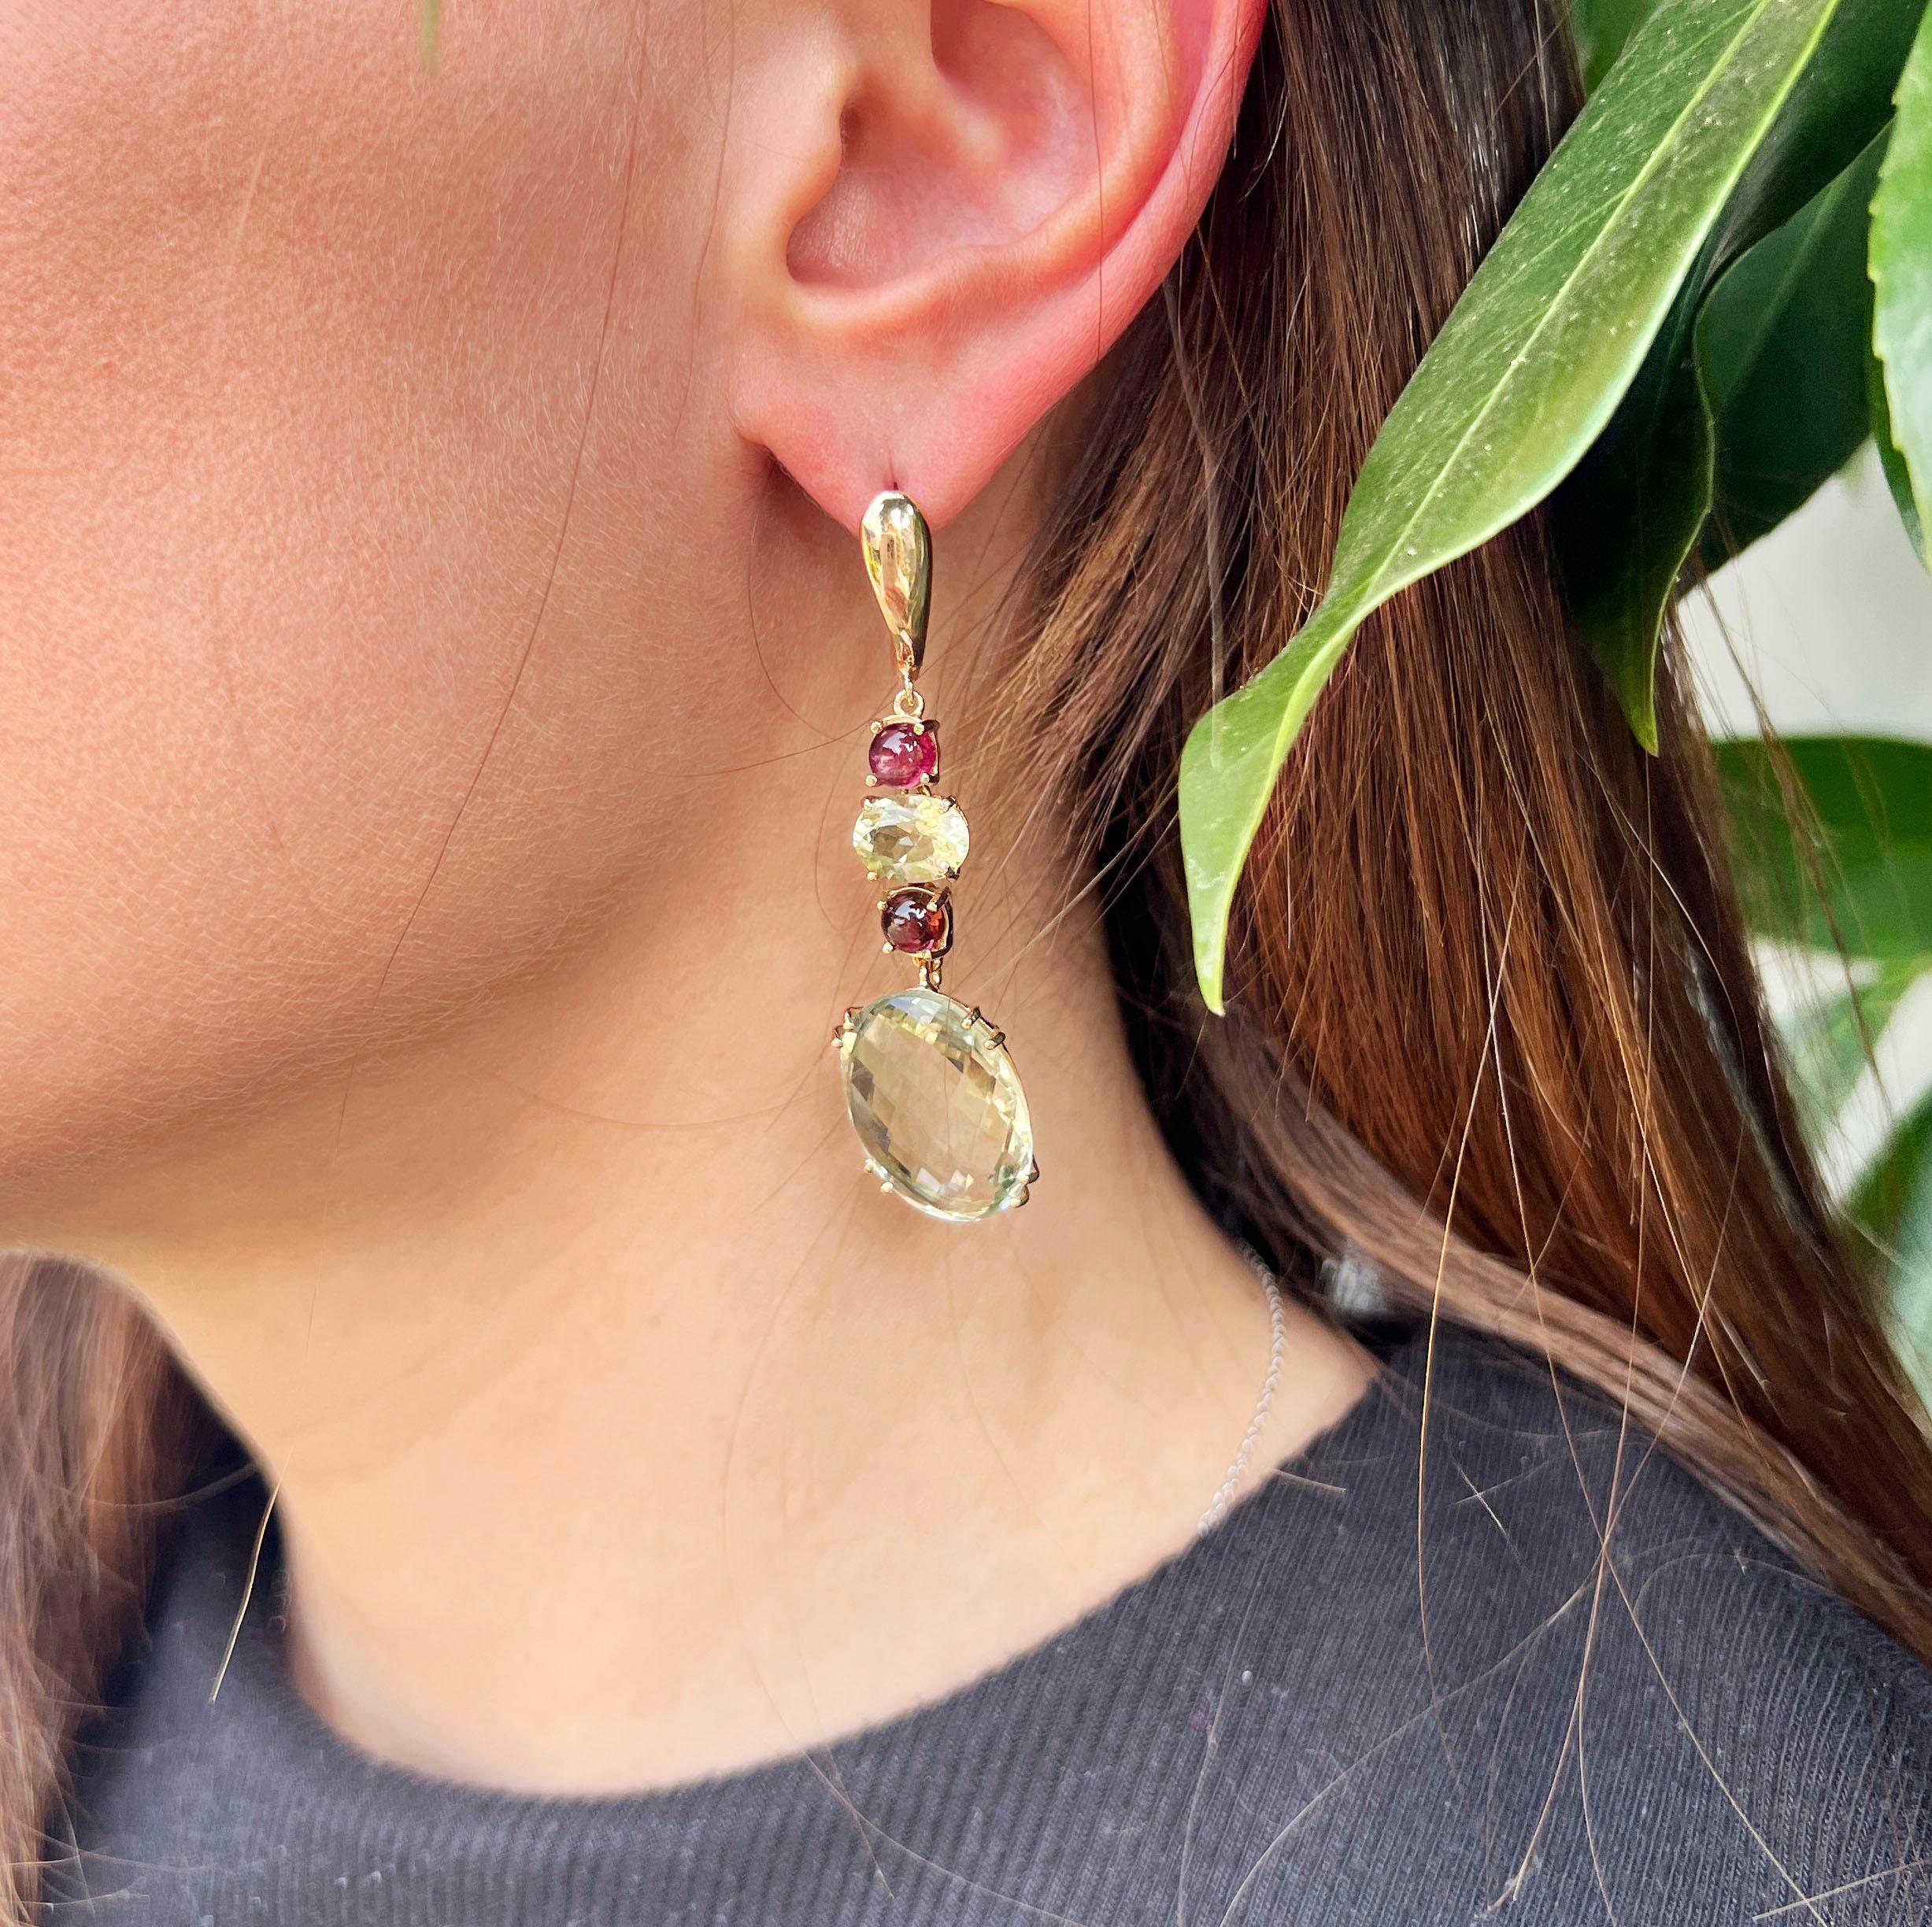 Gold earrings that stand out, for a woman who does not give up beauty. made in Italy by expert designers and goldsmiths.
Earrings in rose gold  weight g 15,40    Length   cm 5,5
Stones: oval Lemon quartz,  round natural tourmaline and Prasiolite